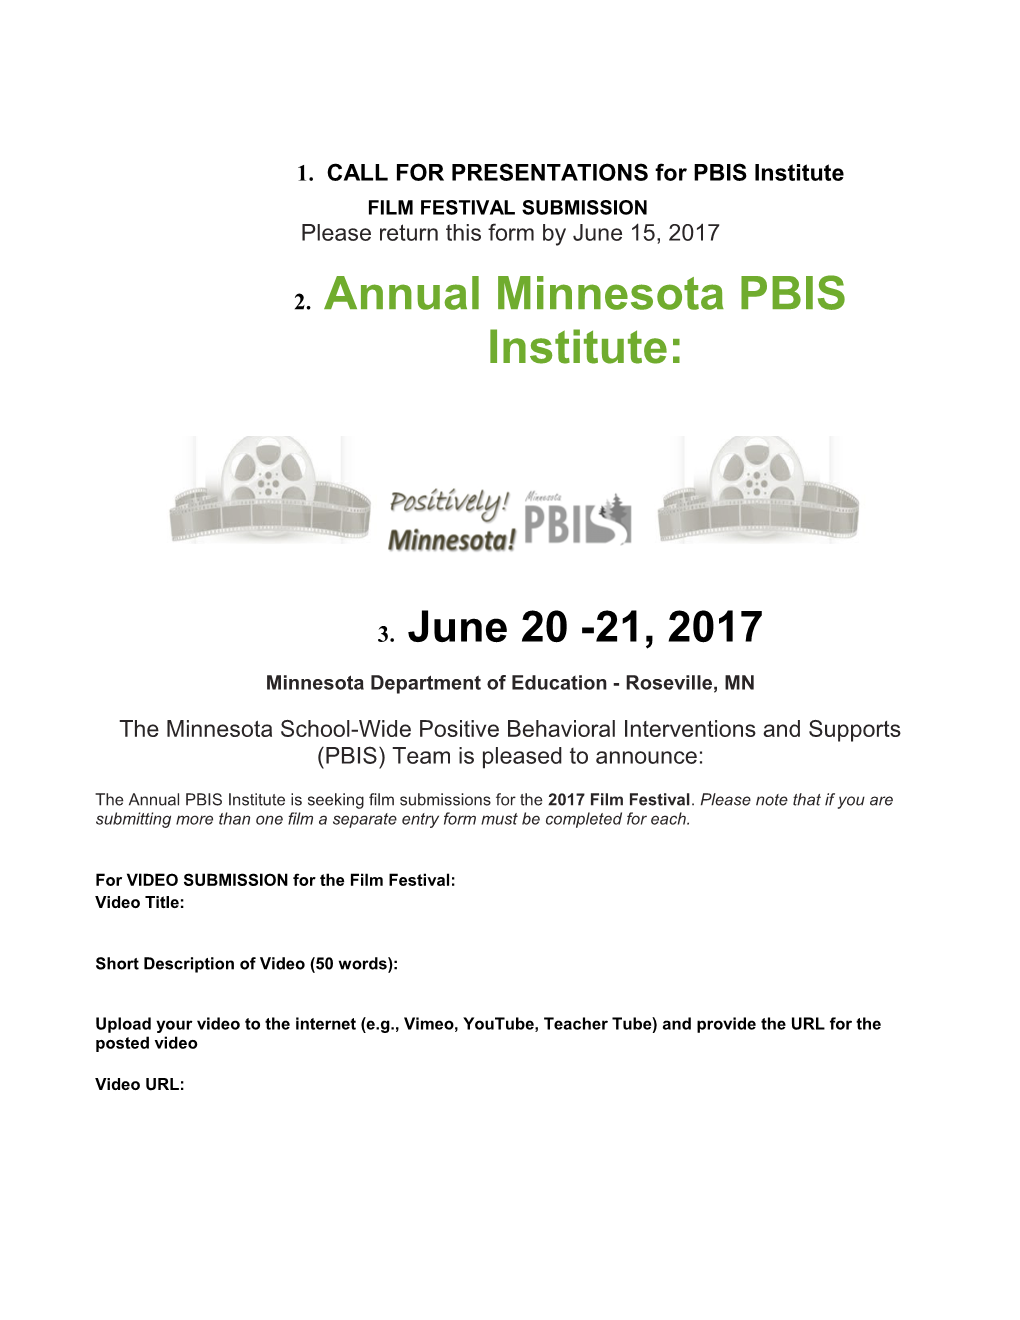 CALL for PRESENTATIONS for PBIS Institute